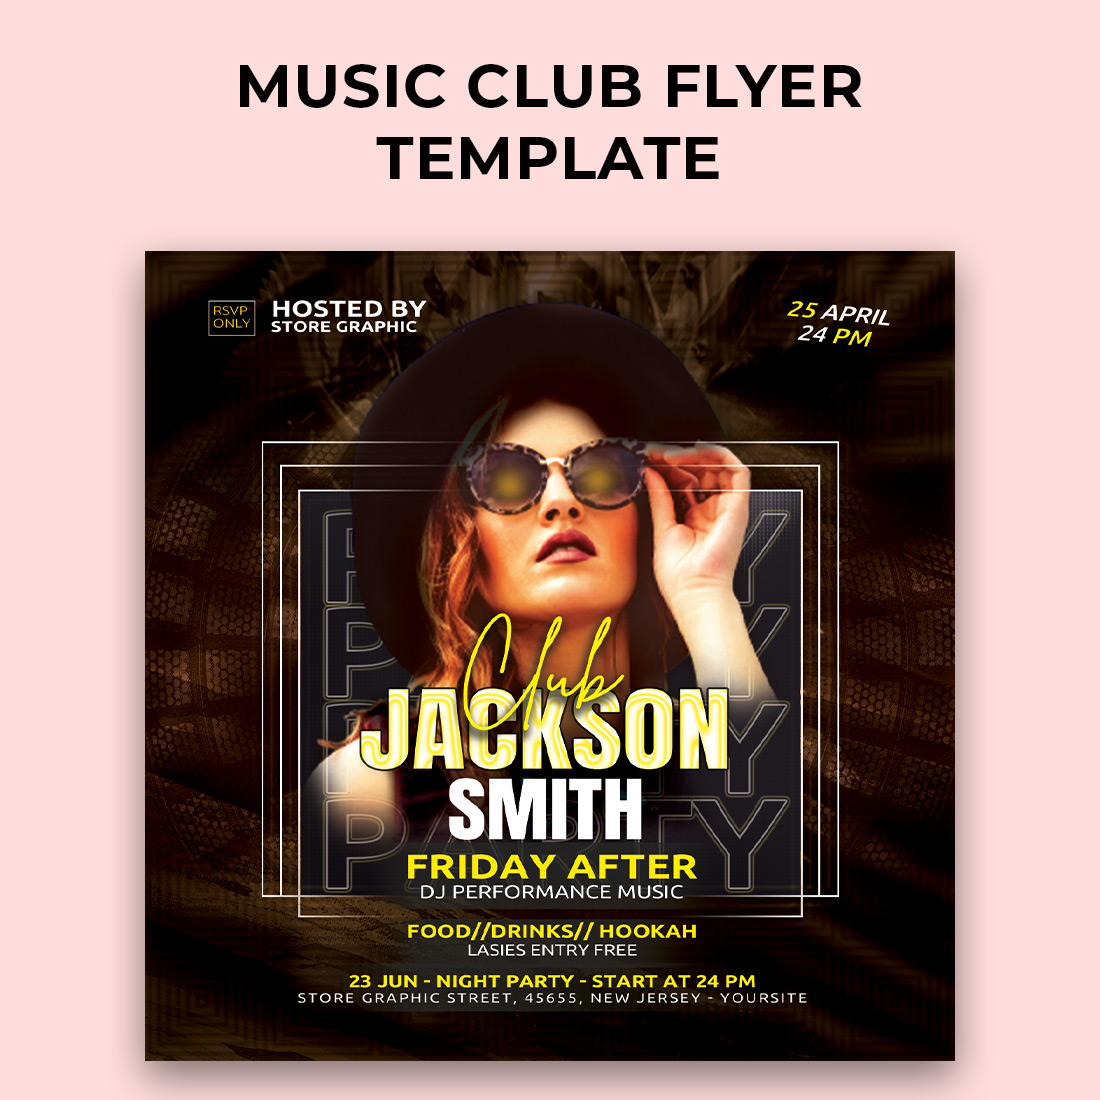 Music club dj night Party Flyer Template Psd preview image.